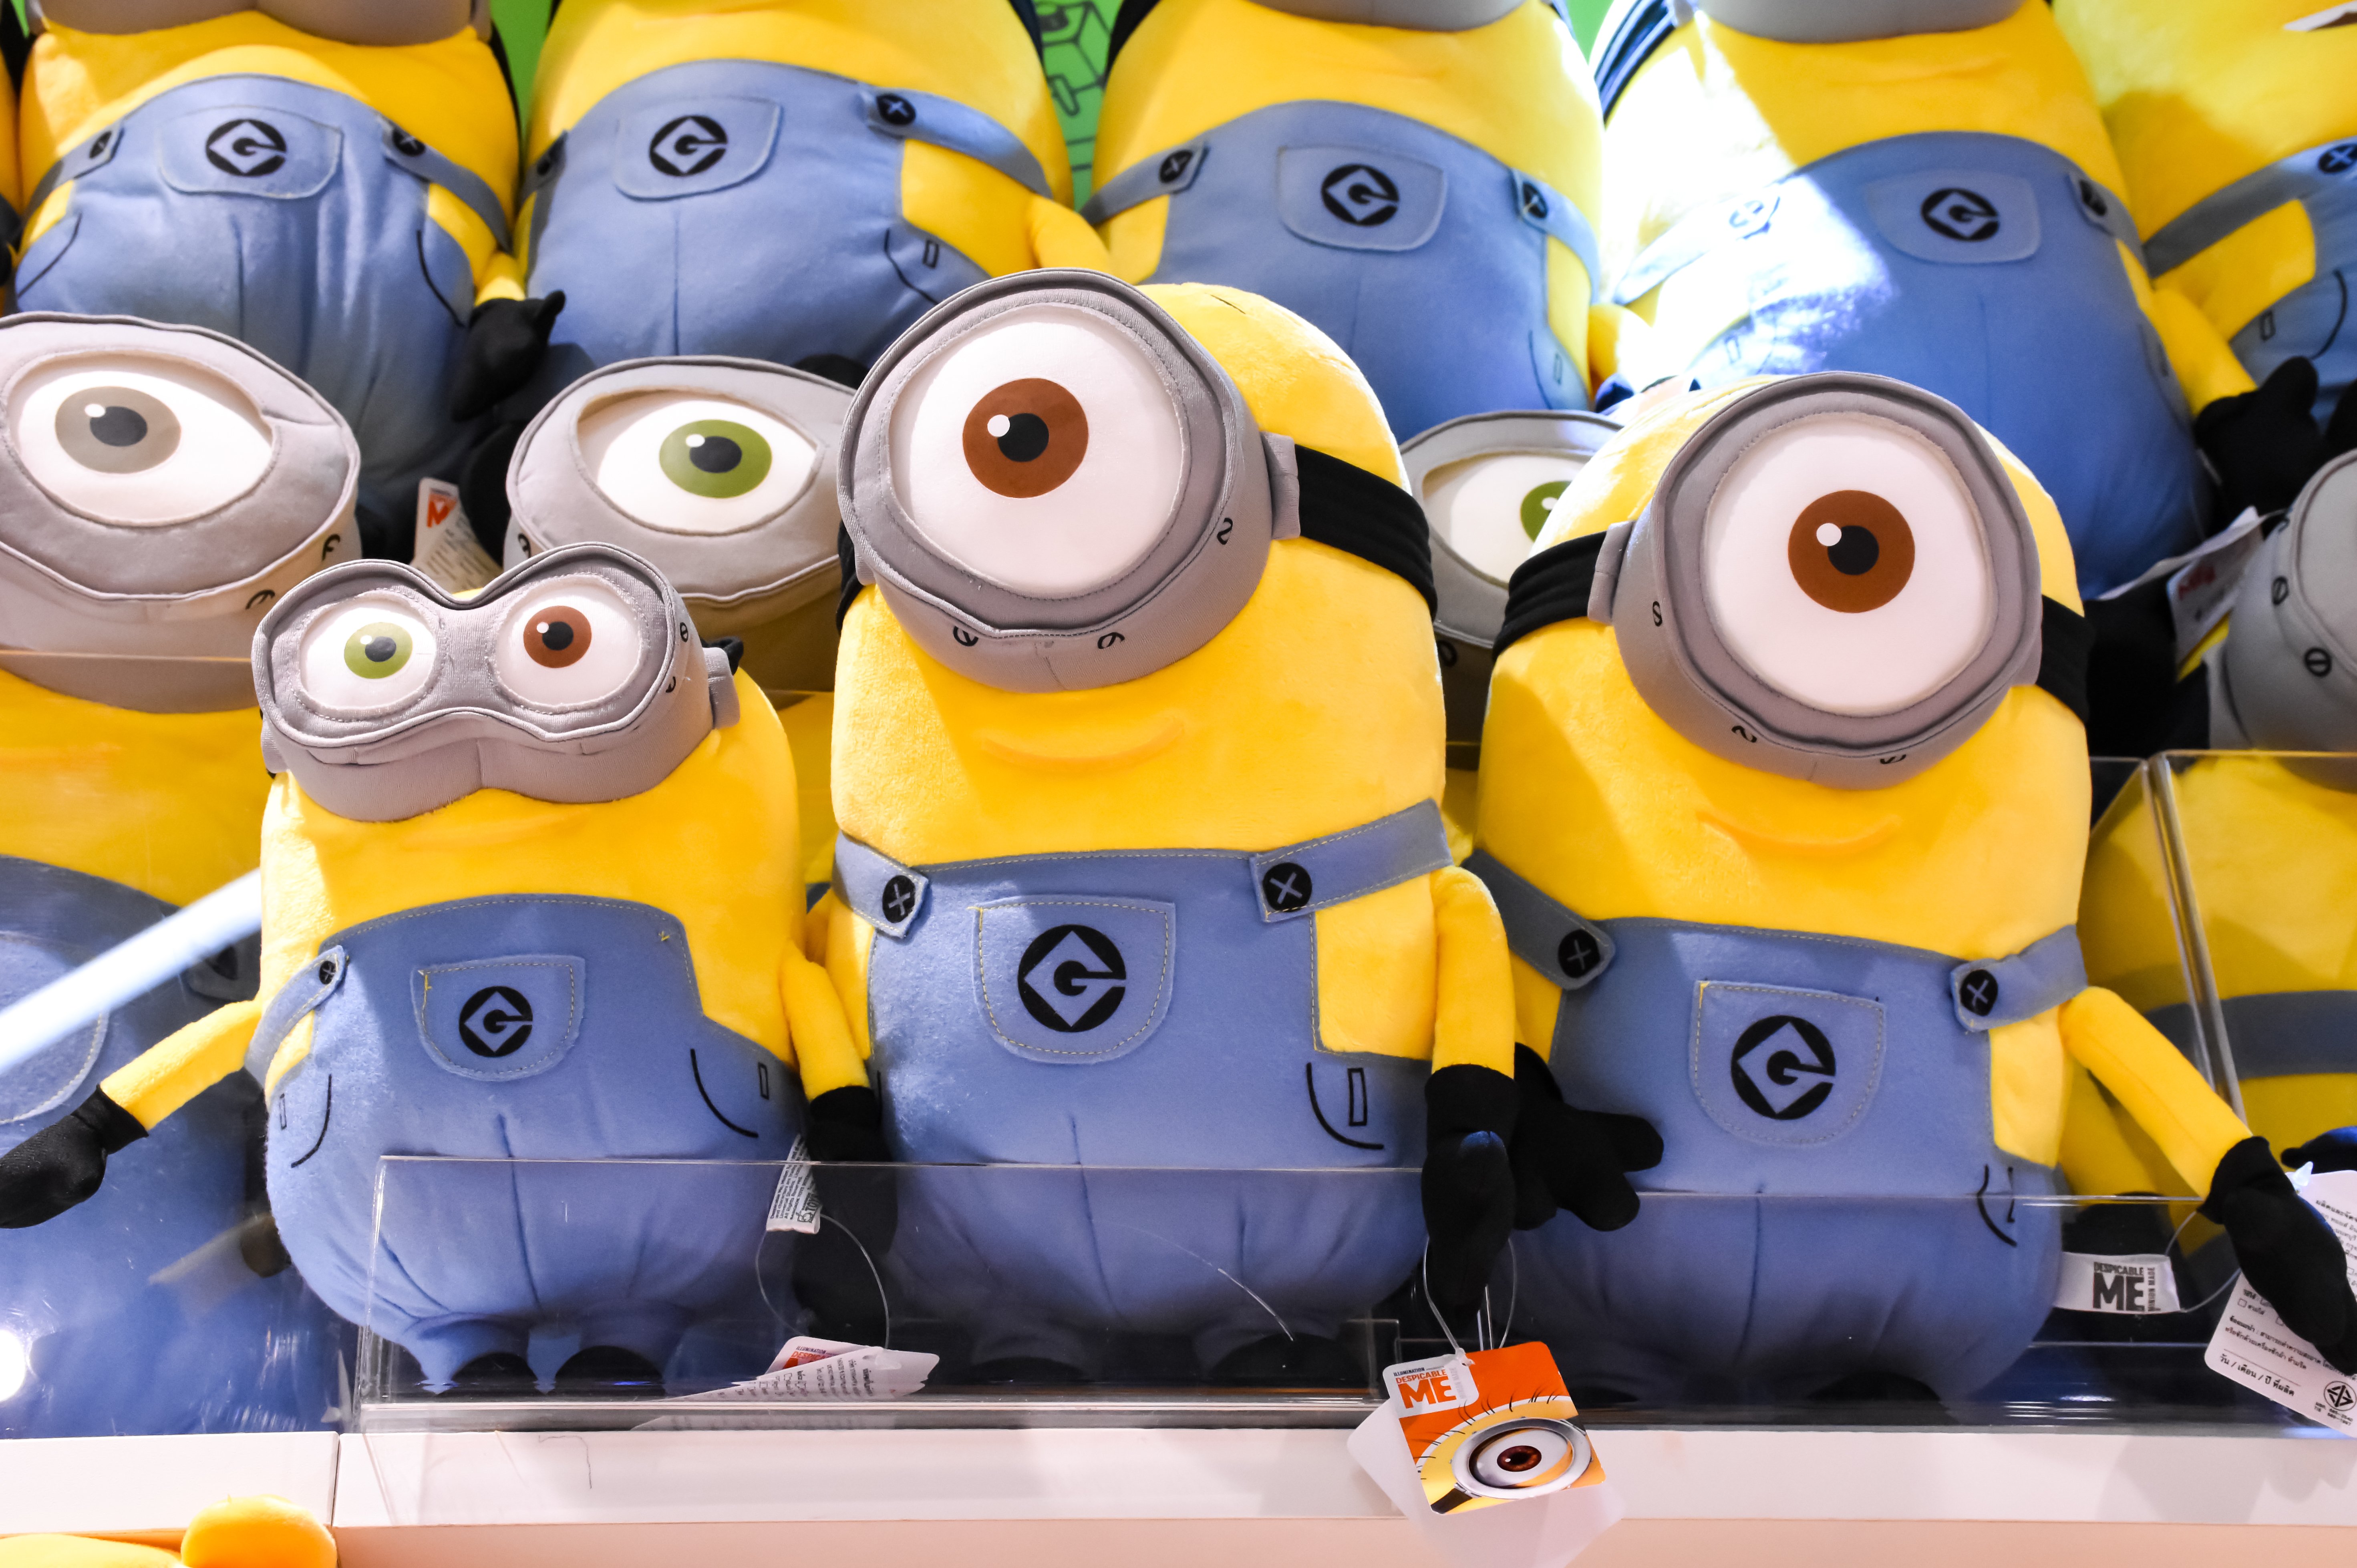 A group of Minions from the film "Despicable Me." | Source: Shutterstock 